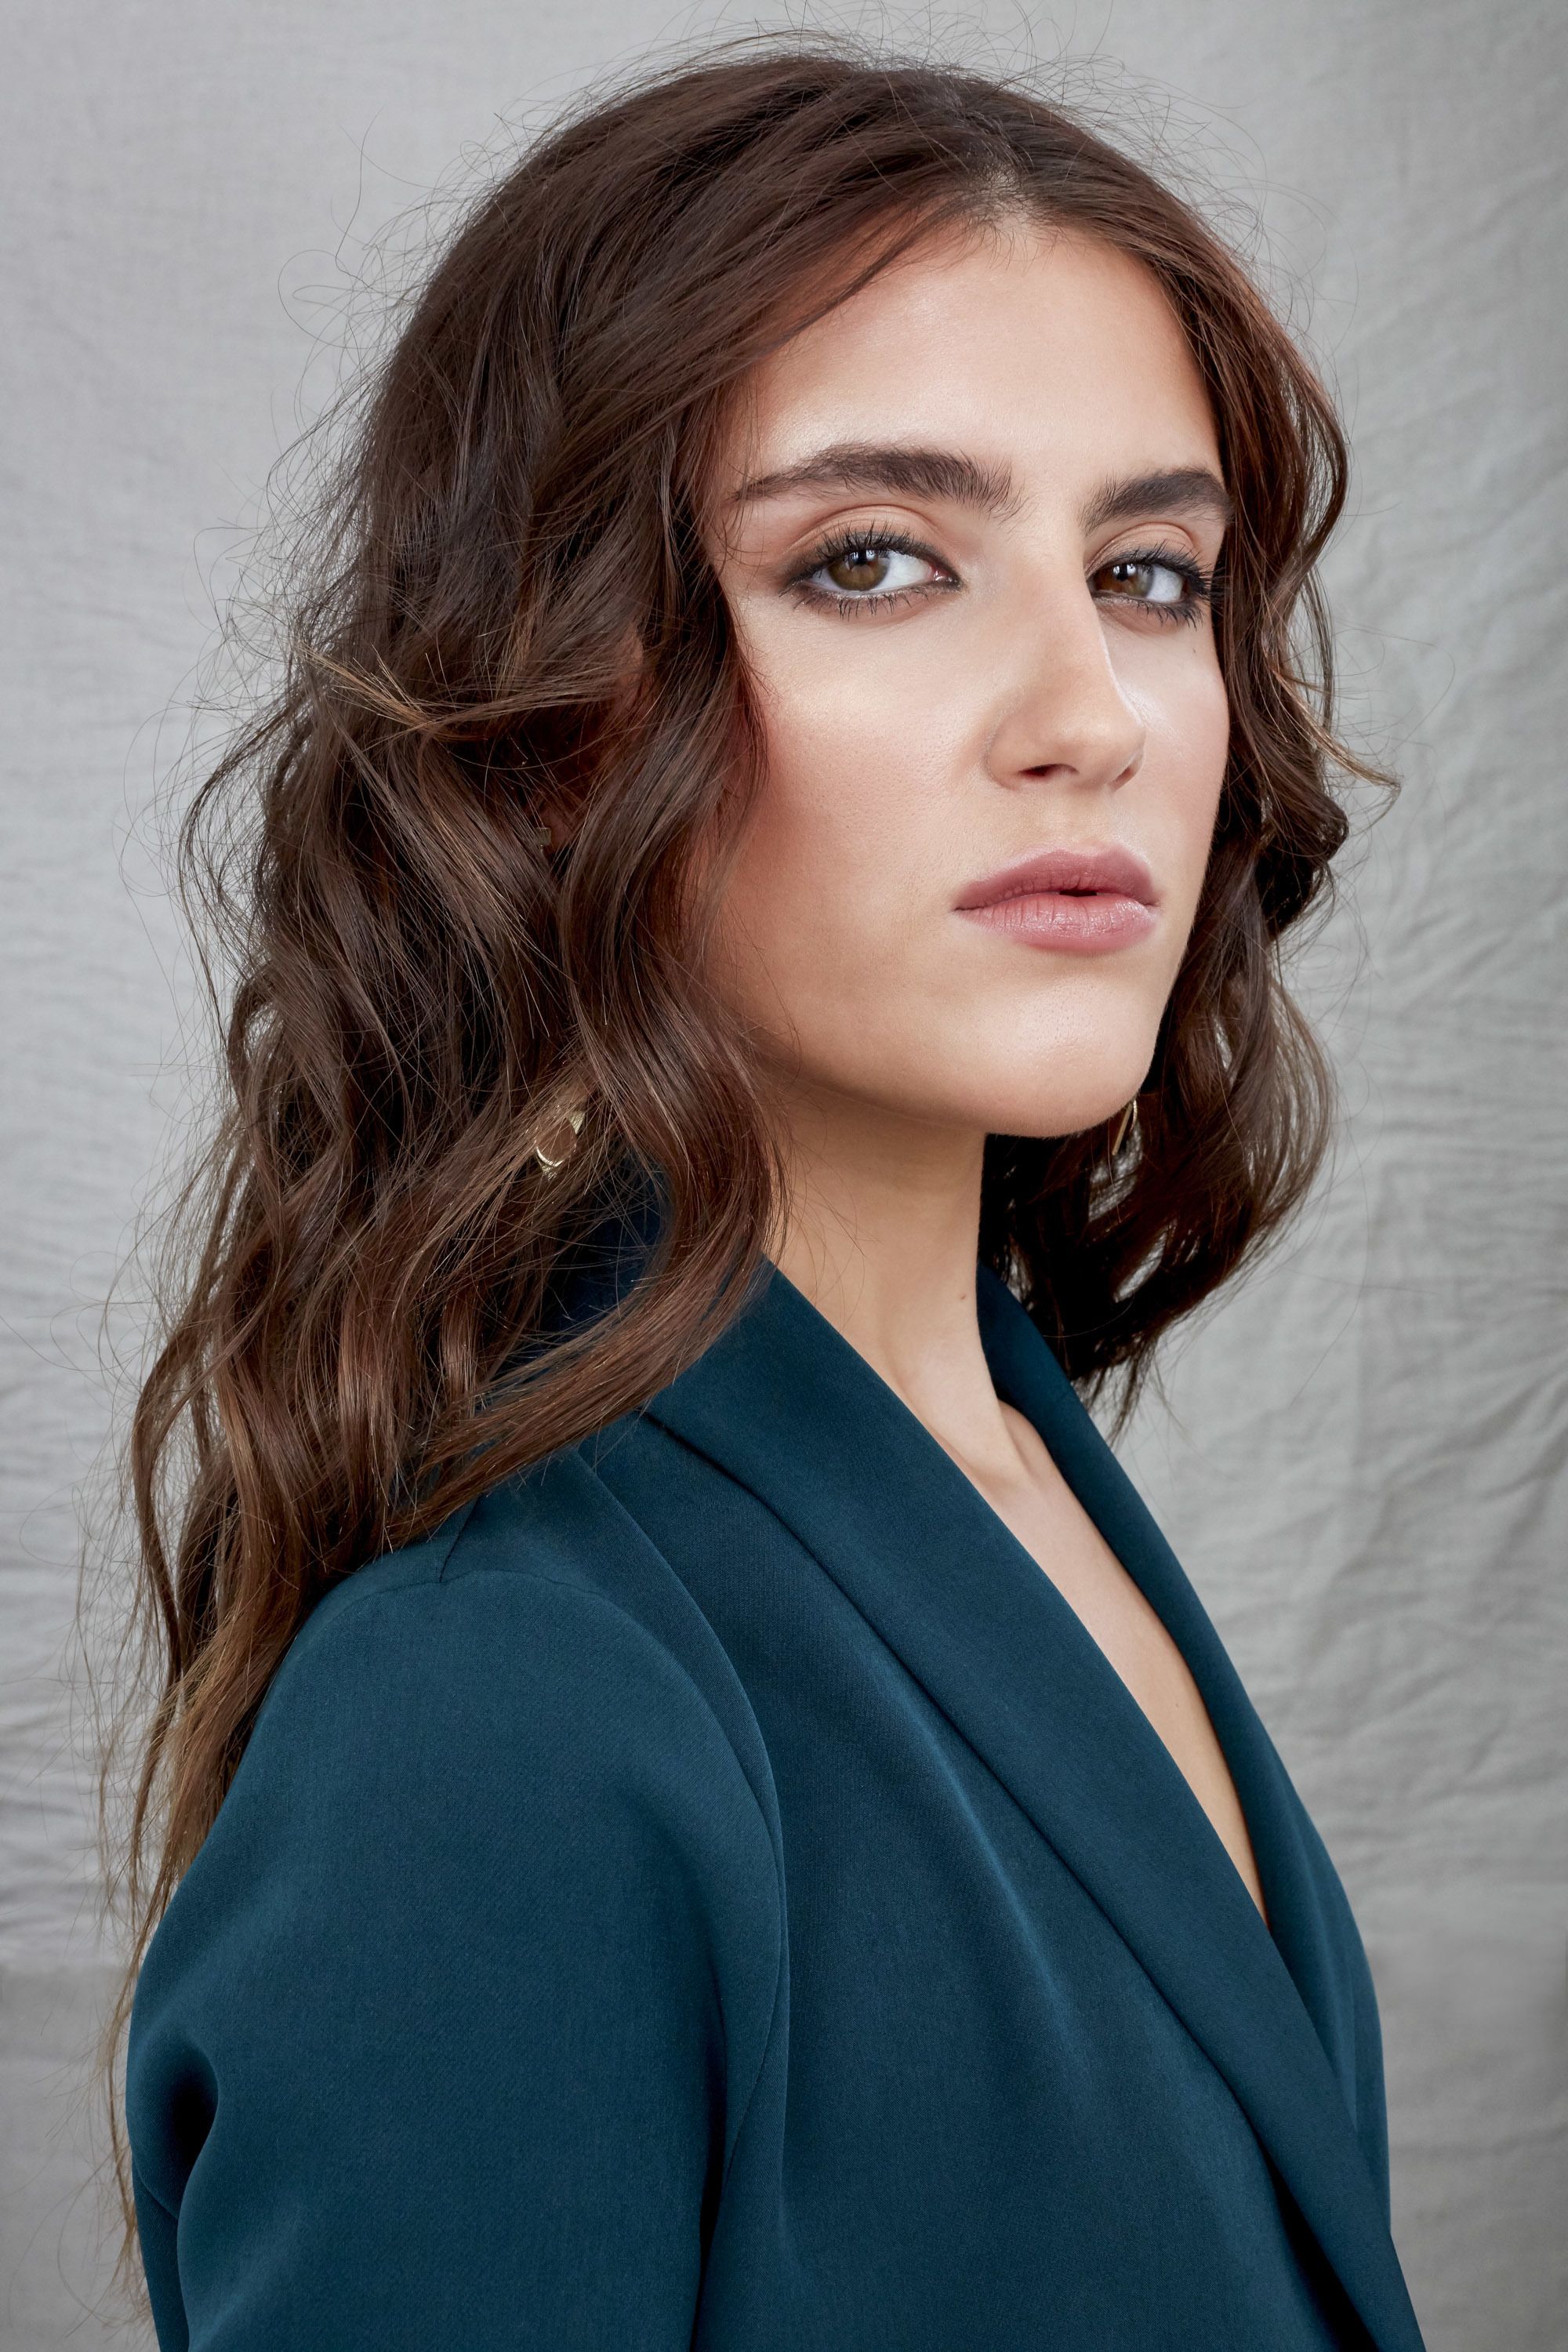 How to style long hair: Studio photo of a brunette woman with voluminous Victoria's Secret waves, wearing a teal blazer dress